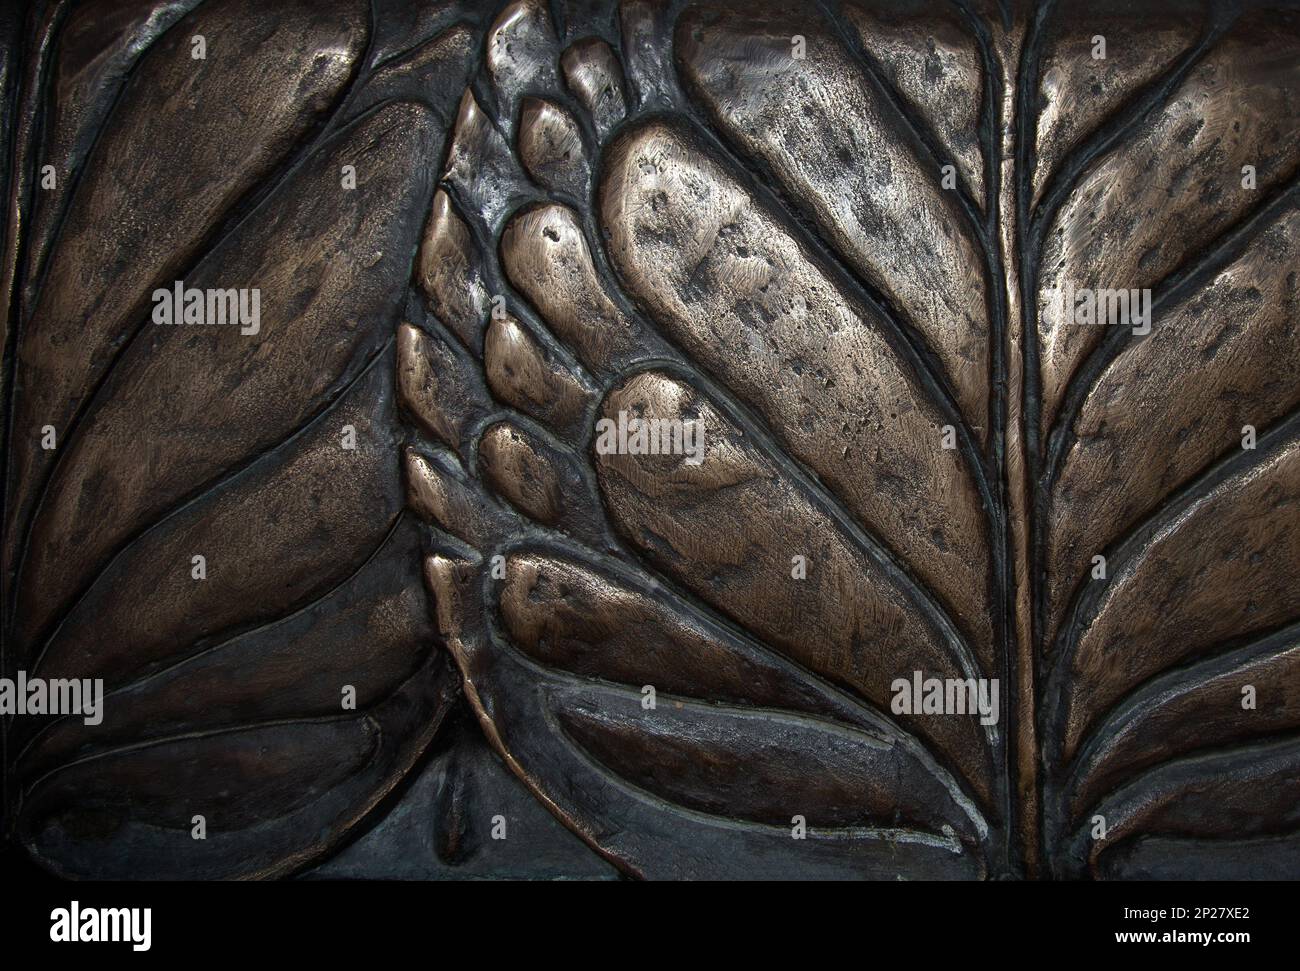 Big leaves close-up macro dark bronze metal relief background. Vintage water lily sculpture foliage art Stock Photo